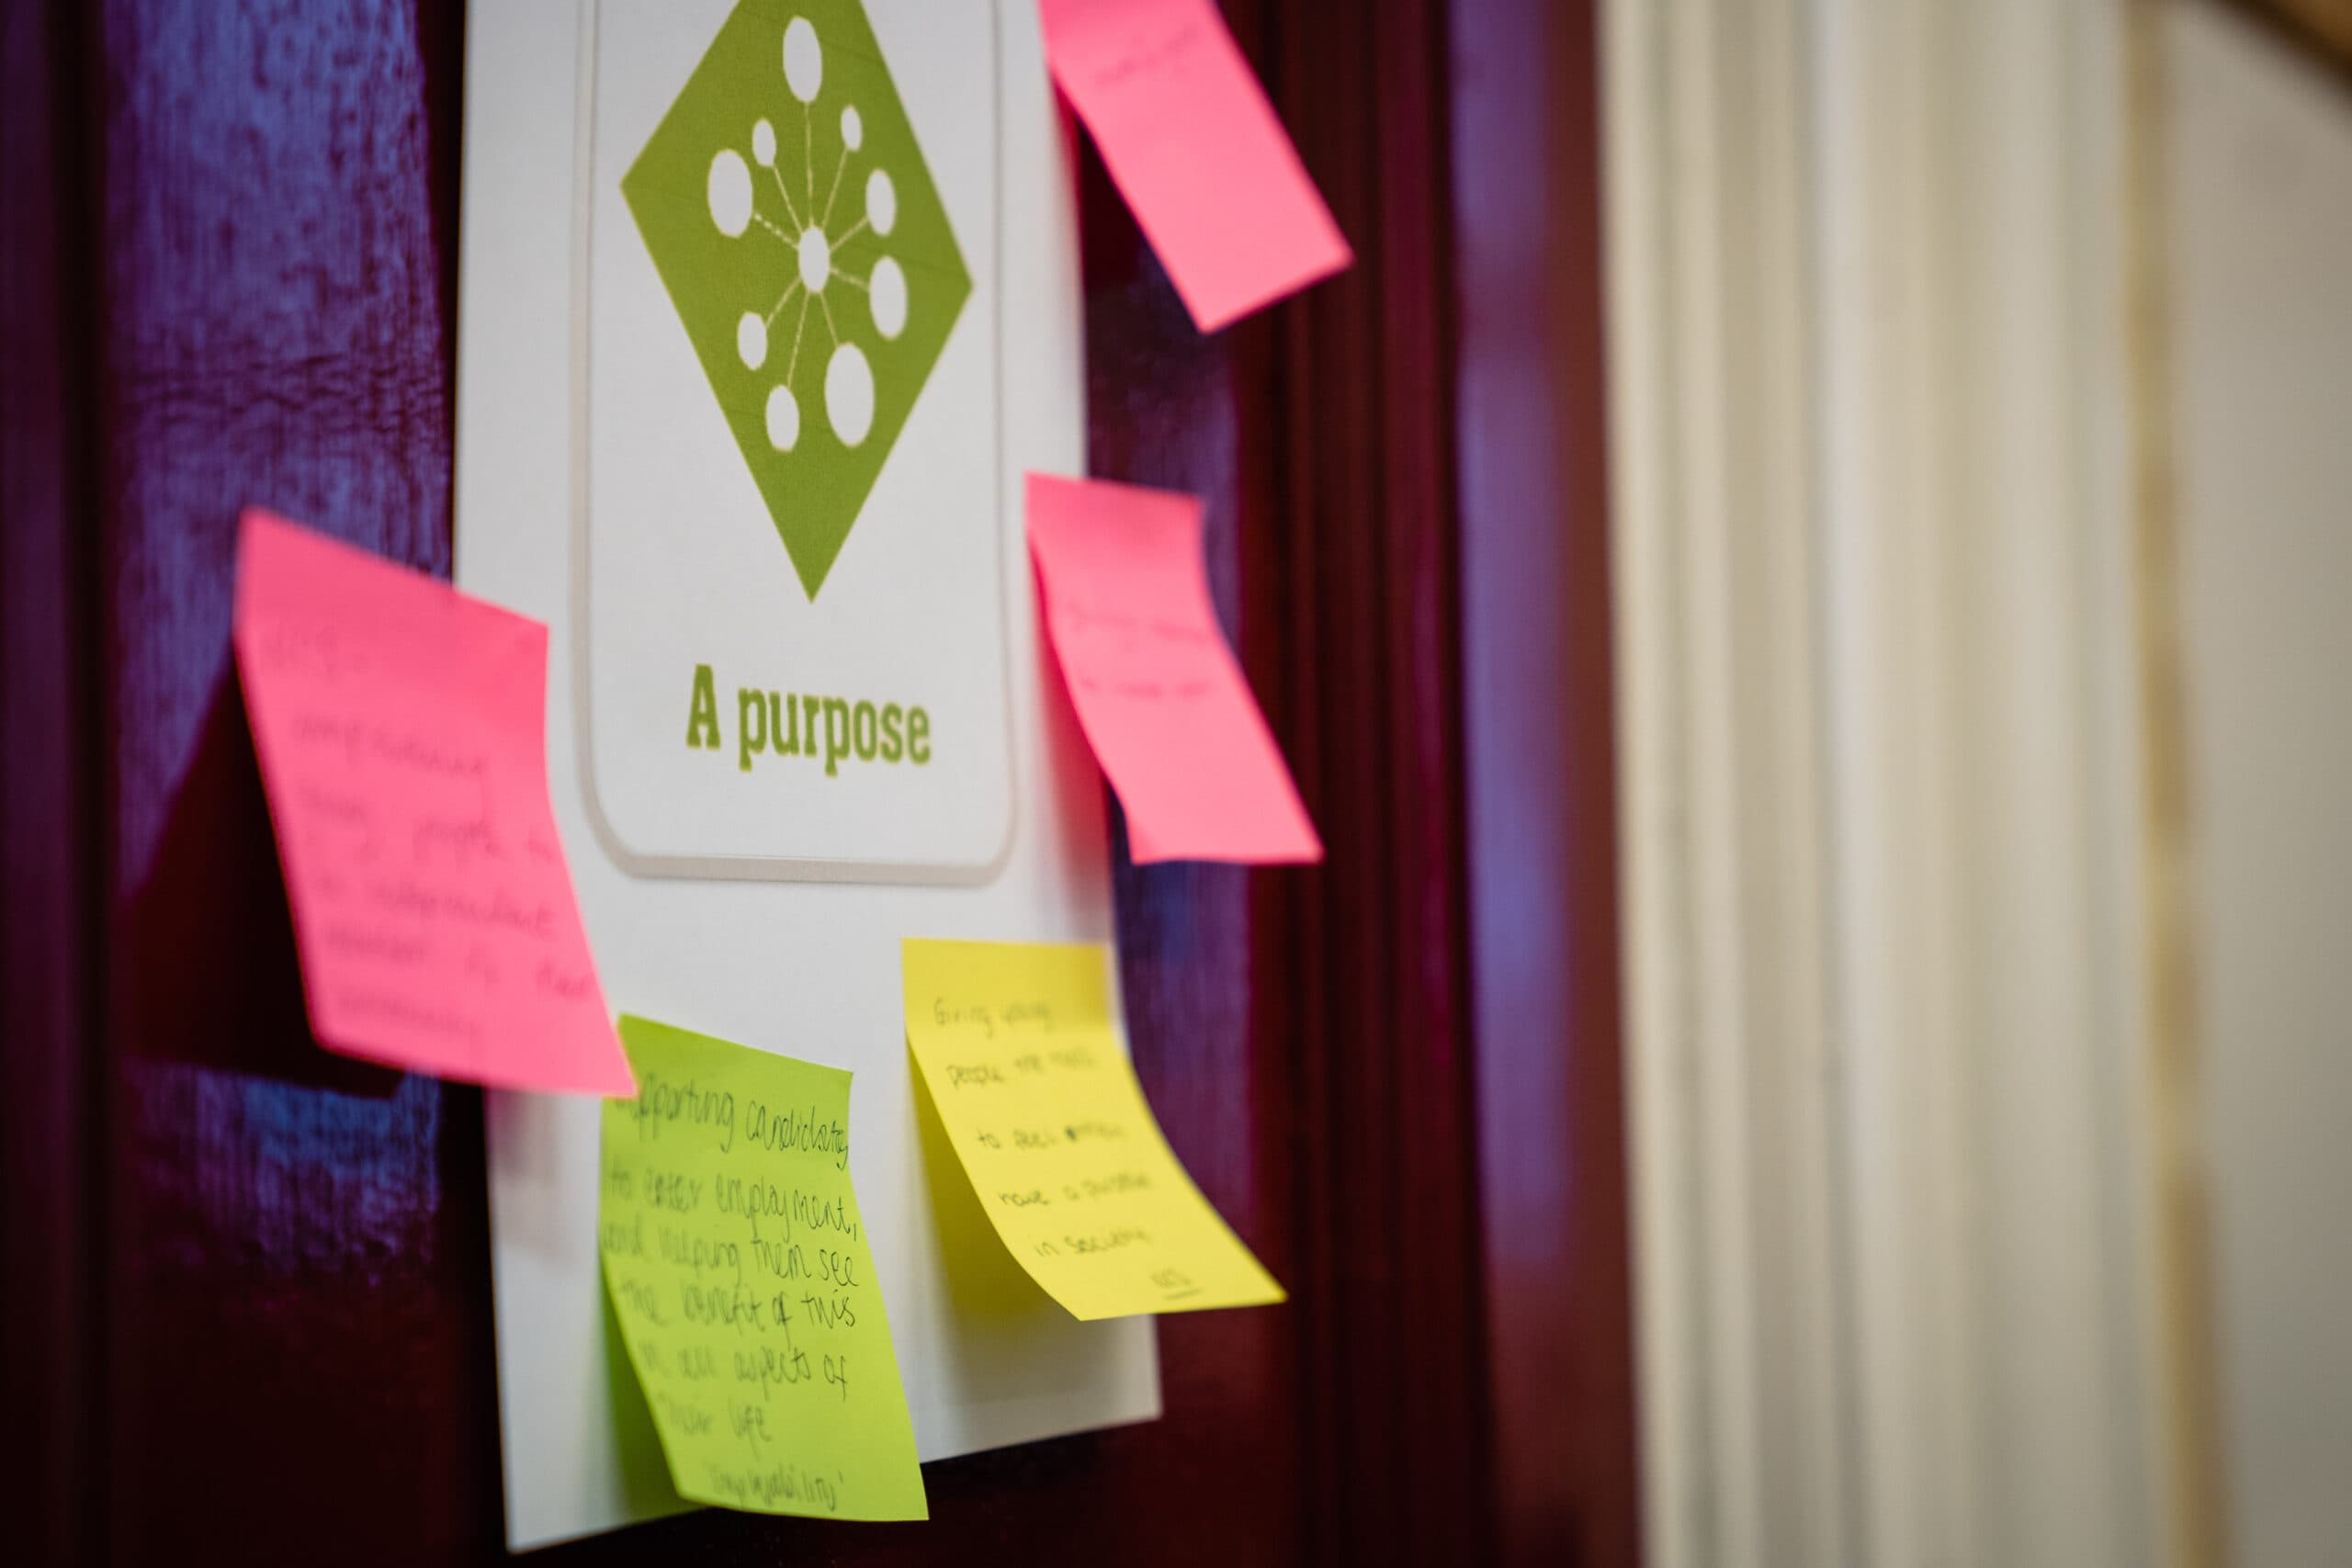 A poster stuck on the wall reads "A purpose". Around it are post-it notes where people have written what "purpose" means to them. None of the post-it notes are legible.